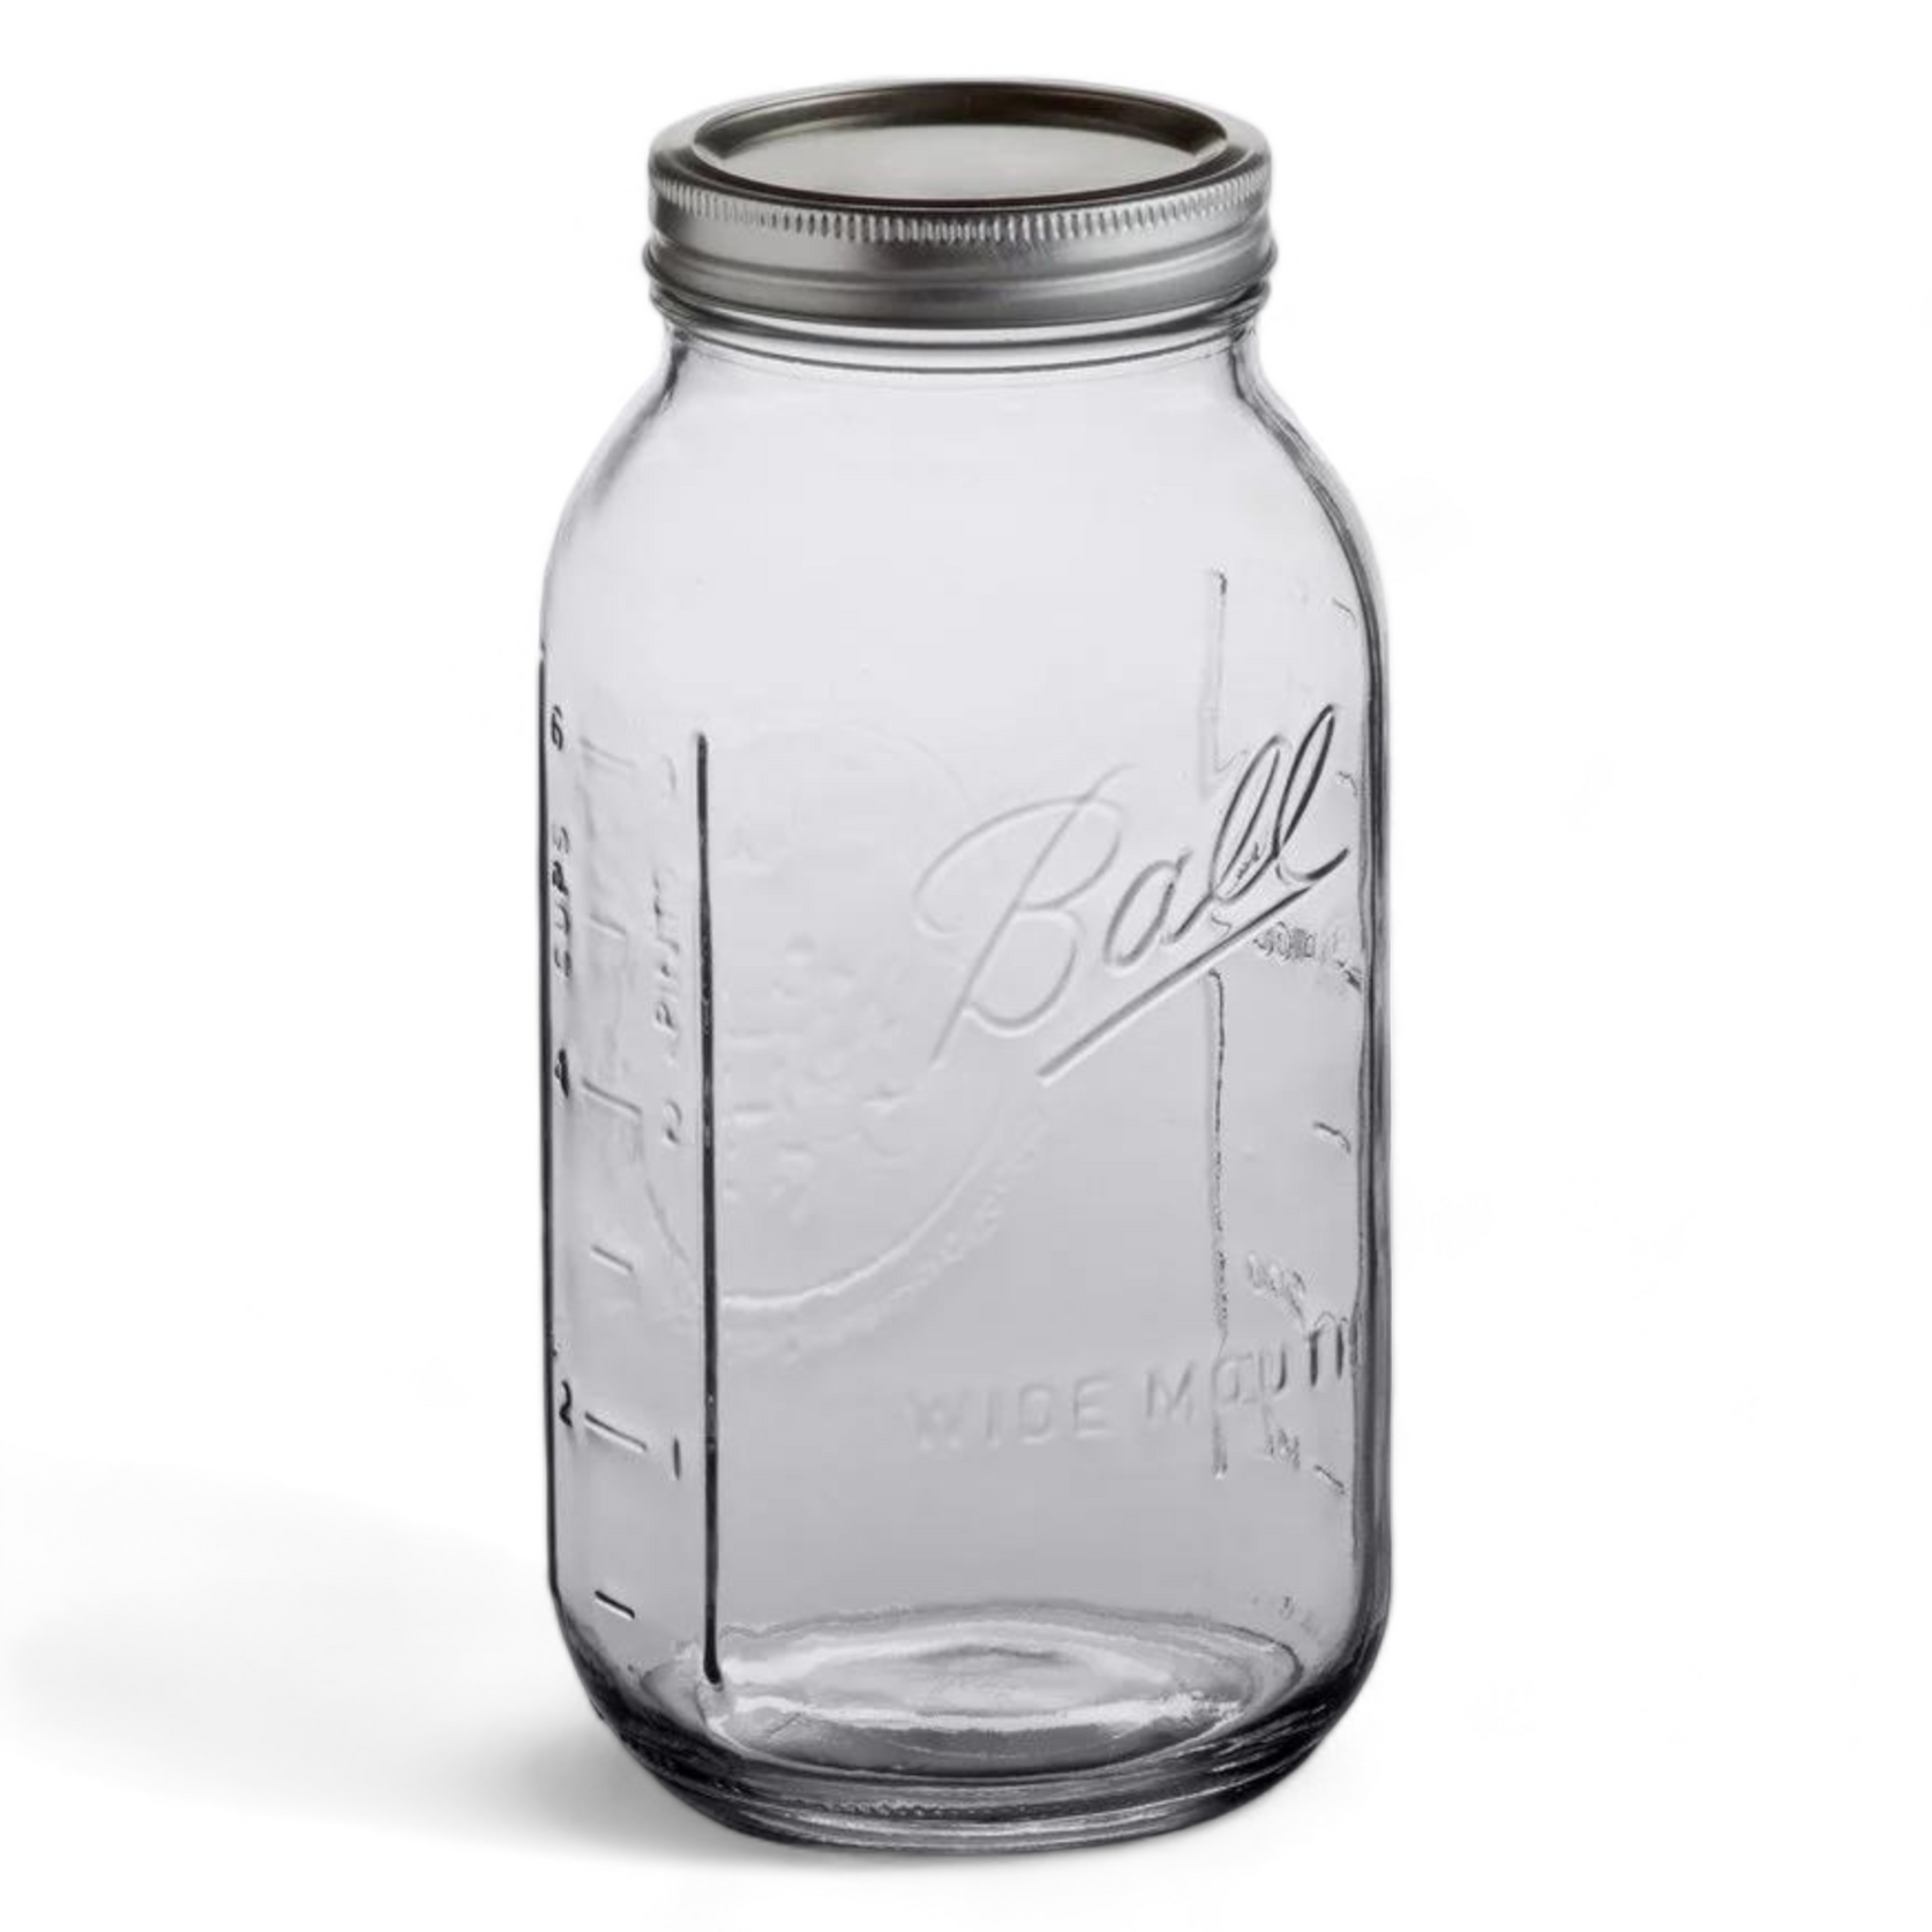 A large Ball mason jar with a metal lid and measuring levels showing